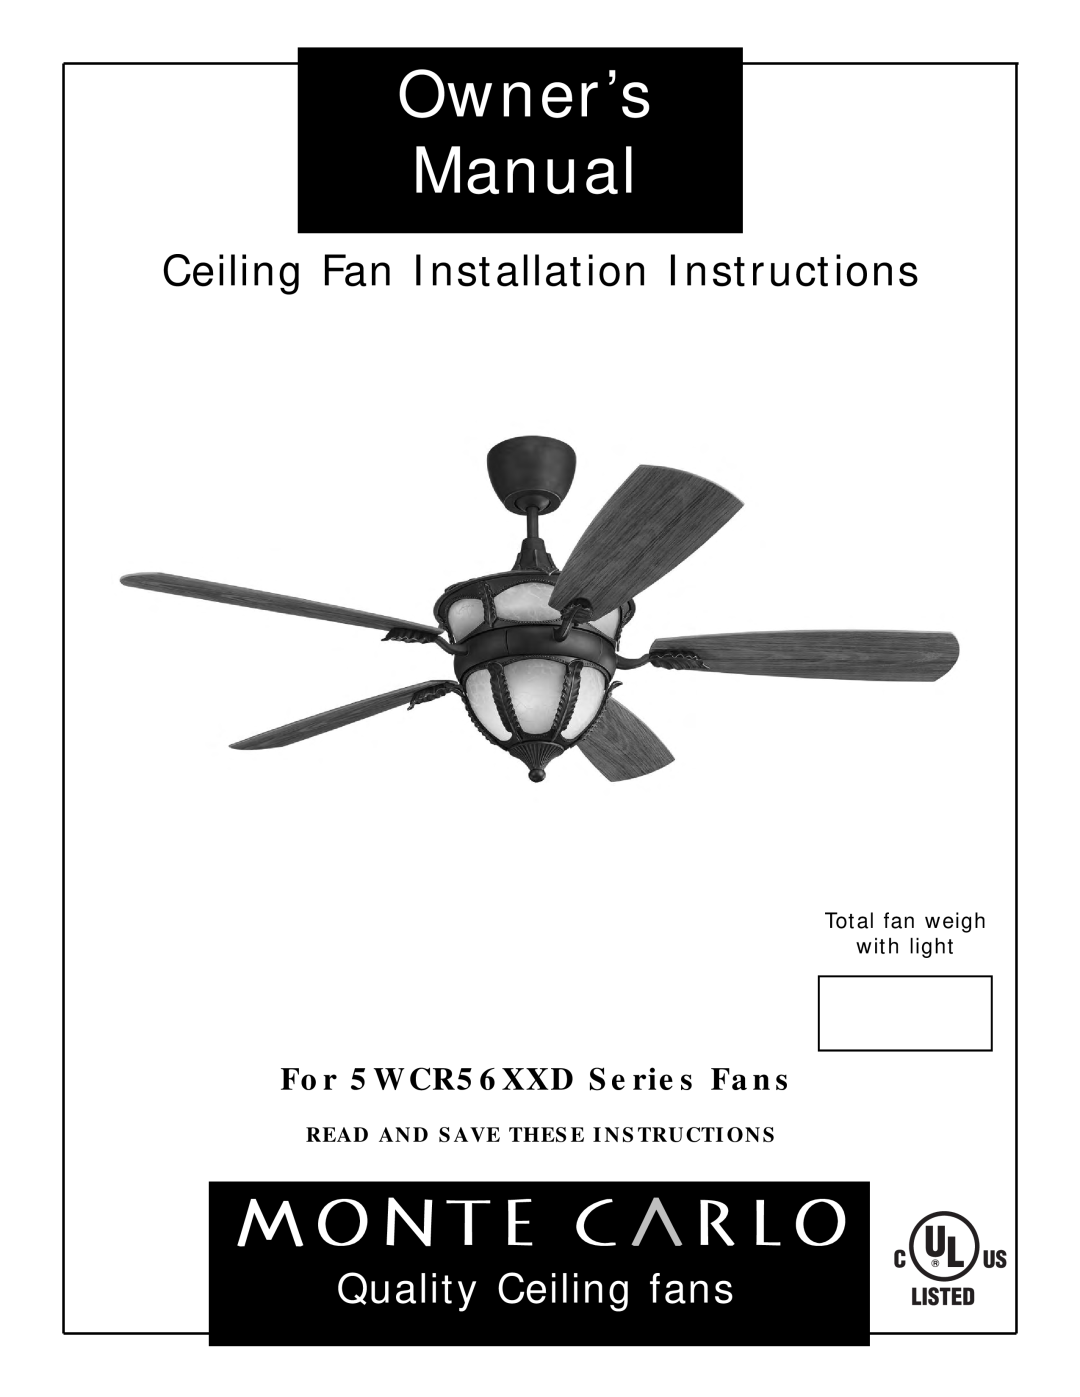 Monte Carlo Fan Company 5WCR56XXD owner manual Ceiling Fan Installation Instructions, Quality Ceiling fans 